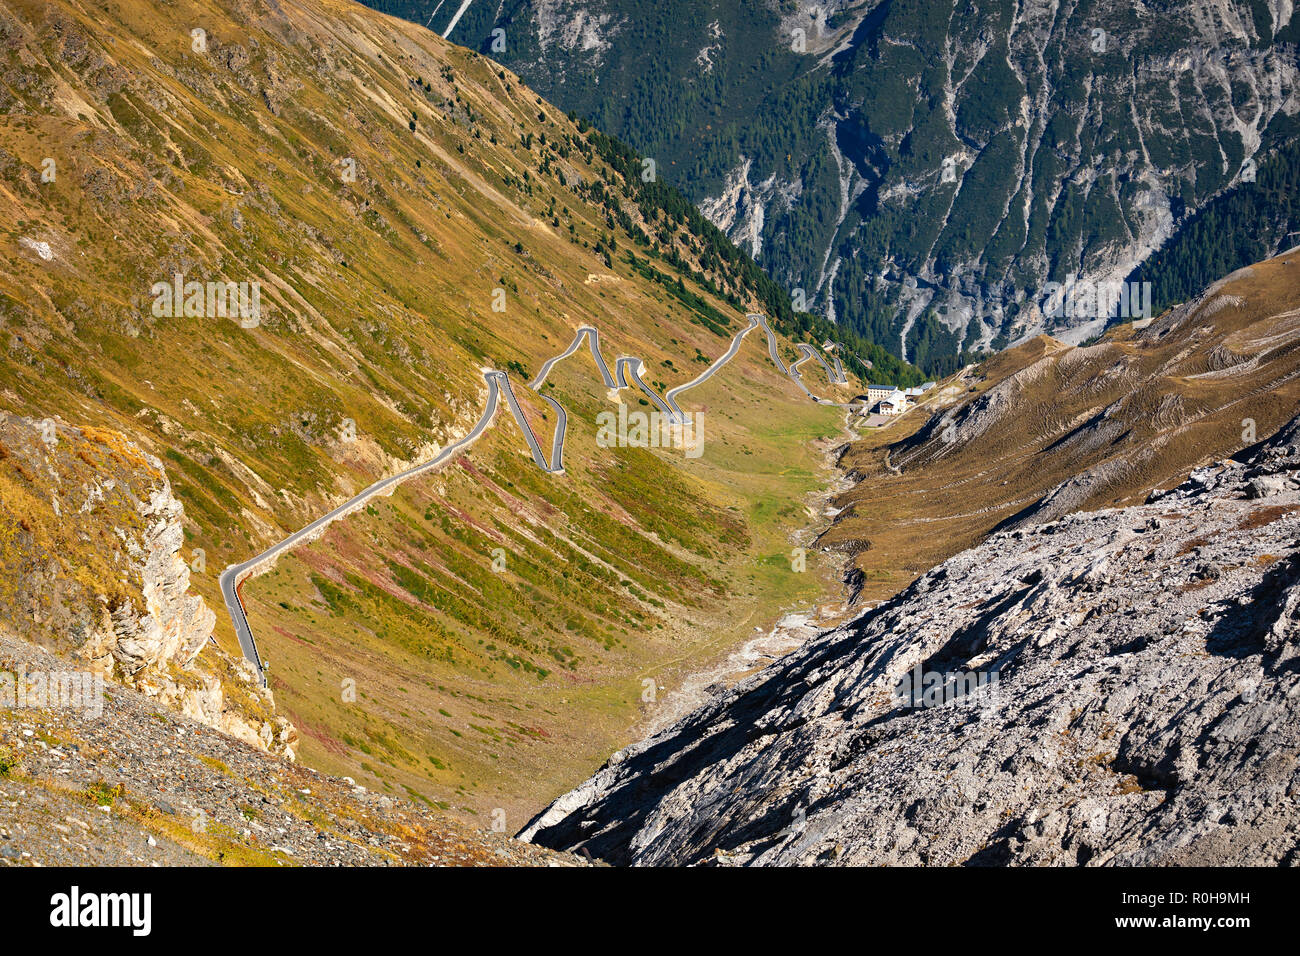 Passo dello Stelvio, the highest paved mountain pass in the Eastern Alps (2757m), Italy Stock Photo